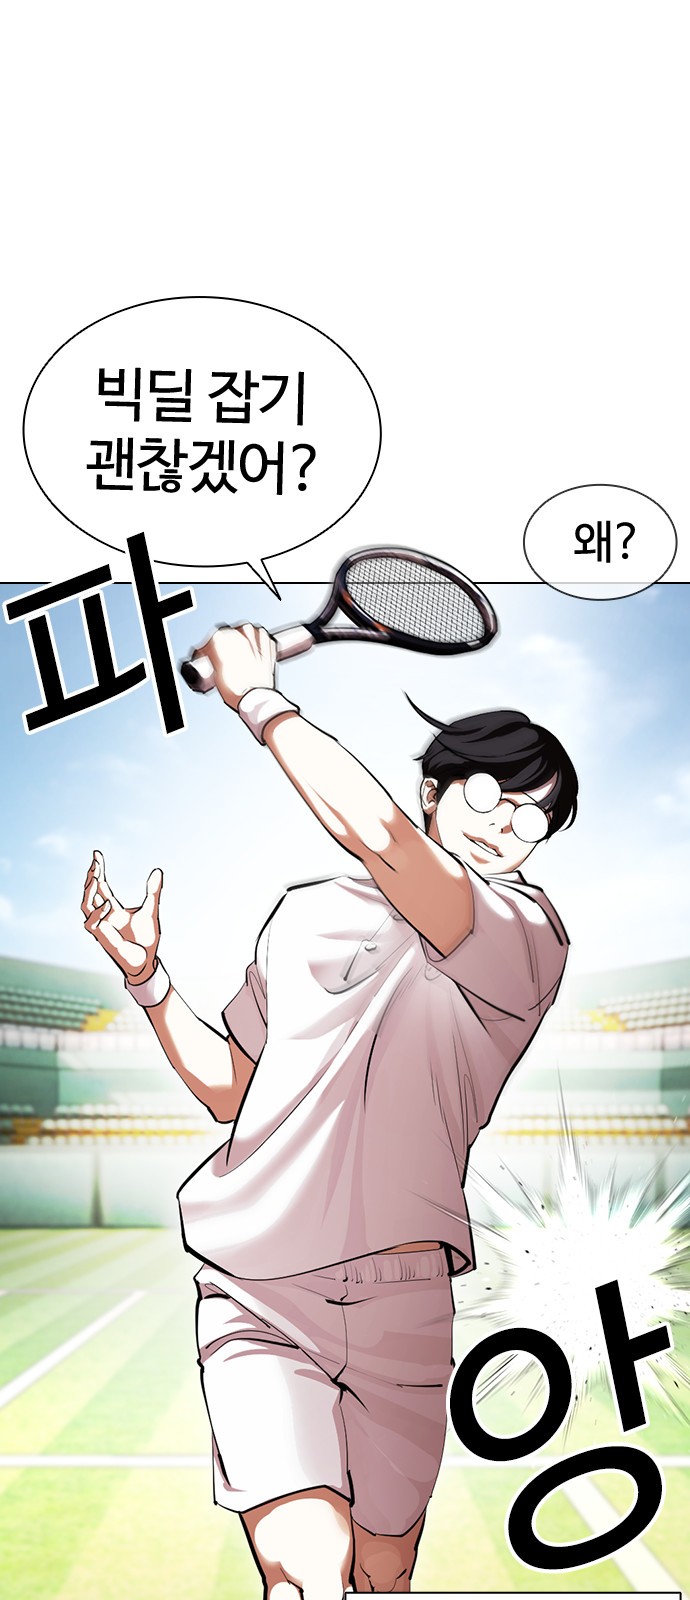 Lookism - Chapter 412 - Page 2